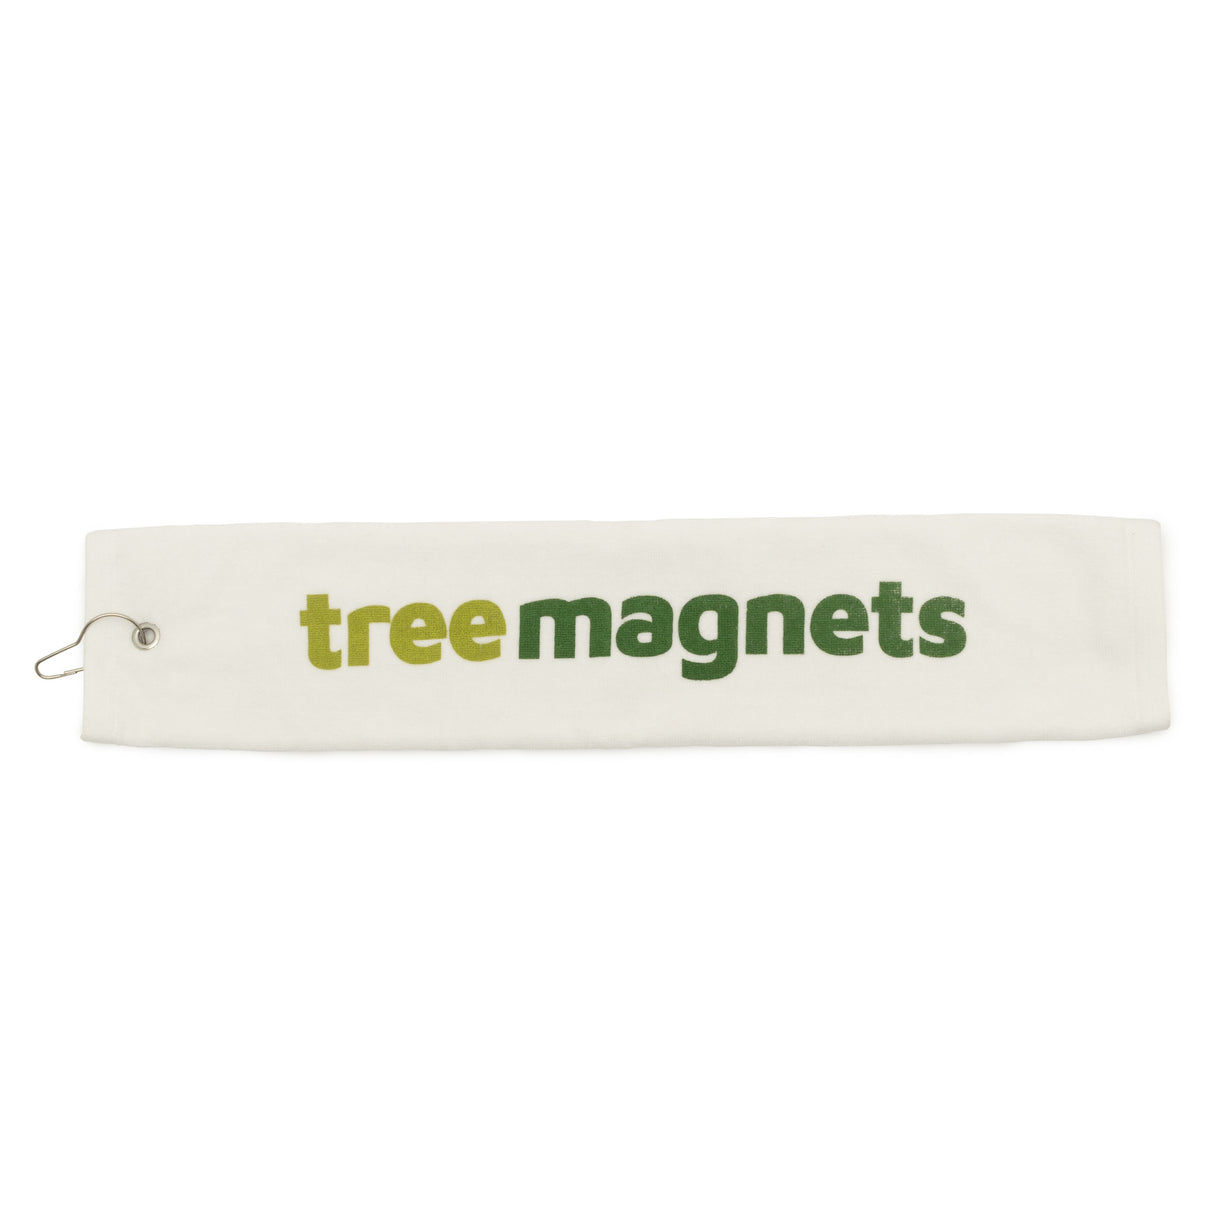 TreeMagnets Trifold Towel - White